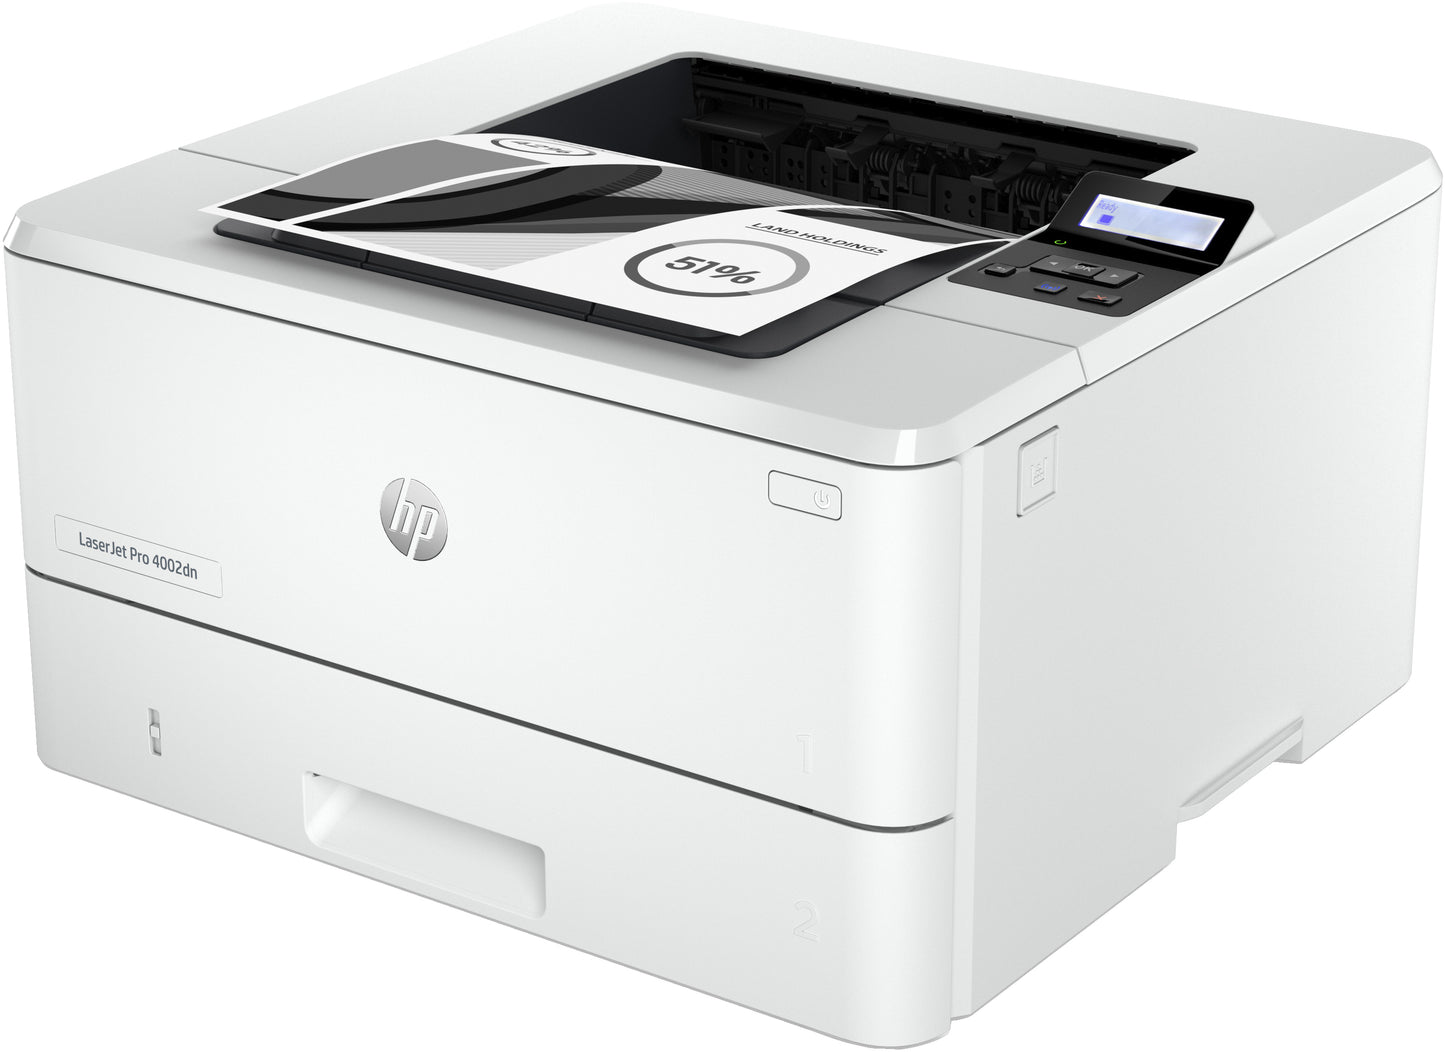 HP LaserJet Pro 4002dn Printer Black and white Printer for Small medium business Print Two-sided printing; Fast first page out speeds; Energy Efficient; Compact Size; Strong Security